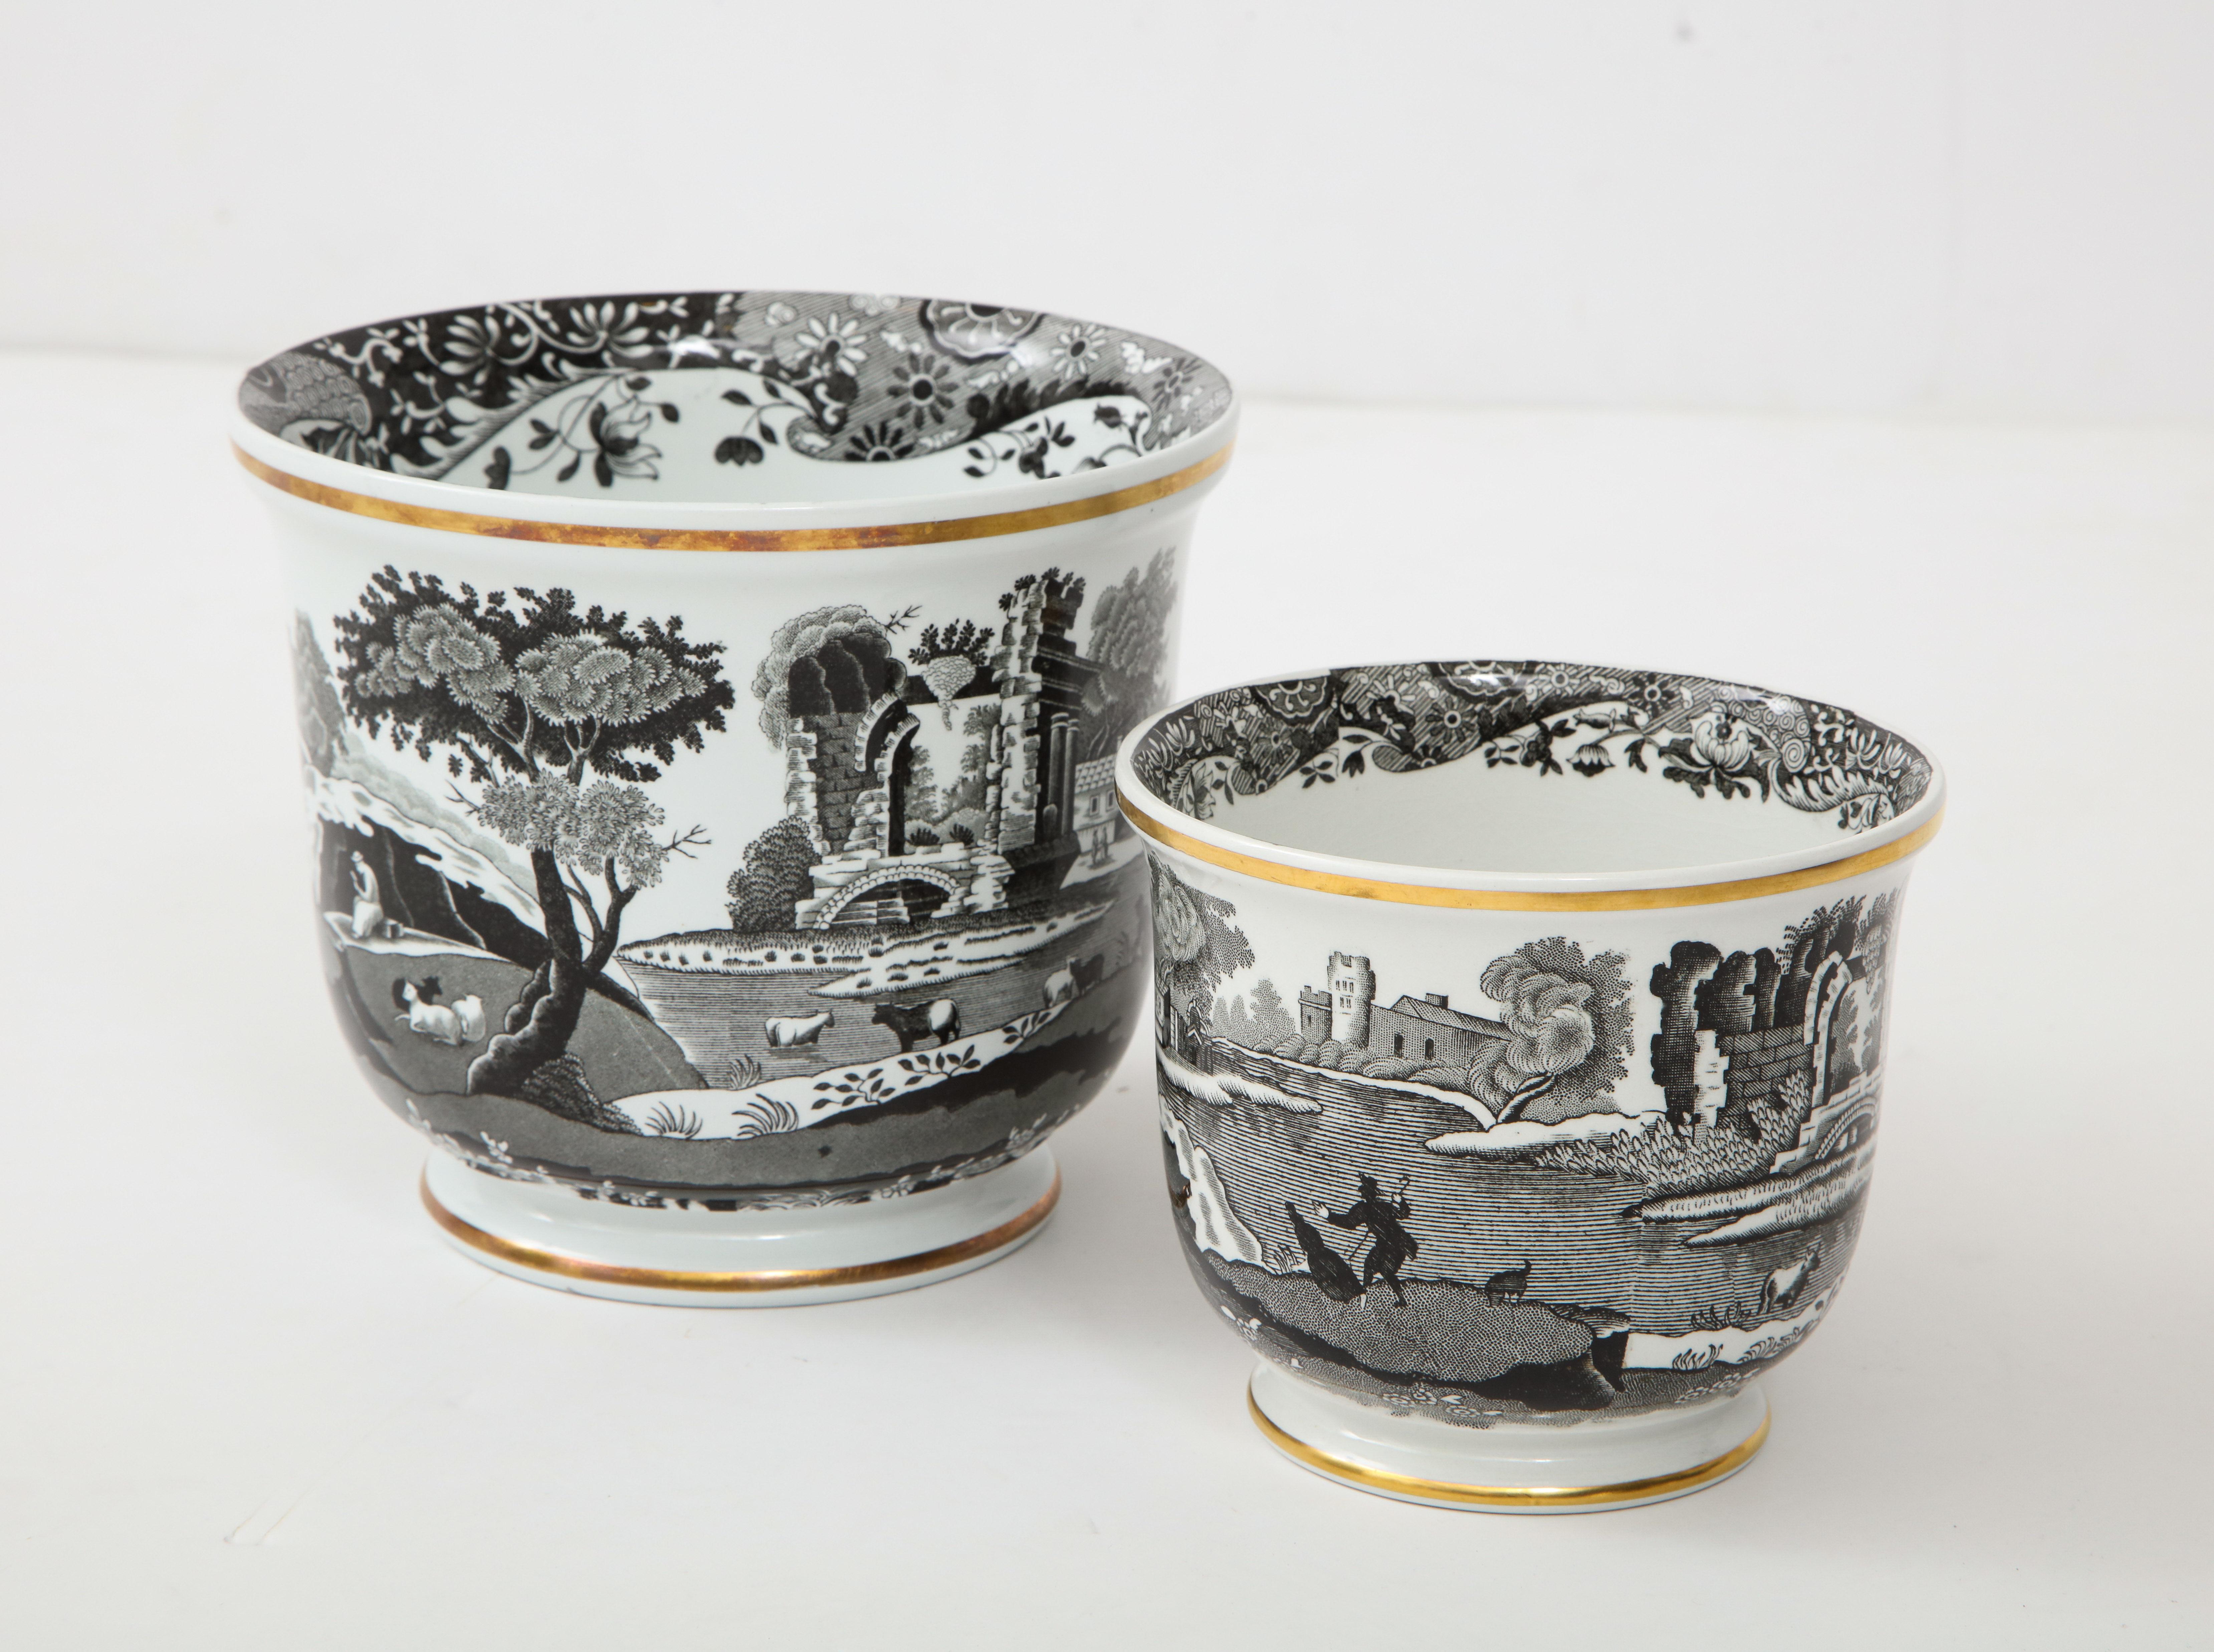 English Pair of Spode Black and White Cachepots